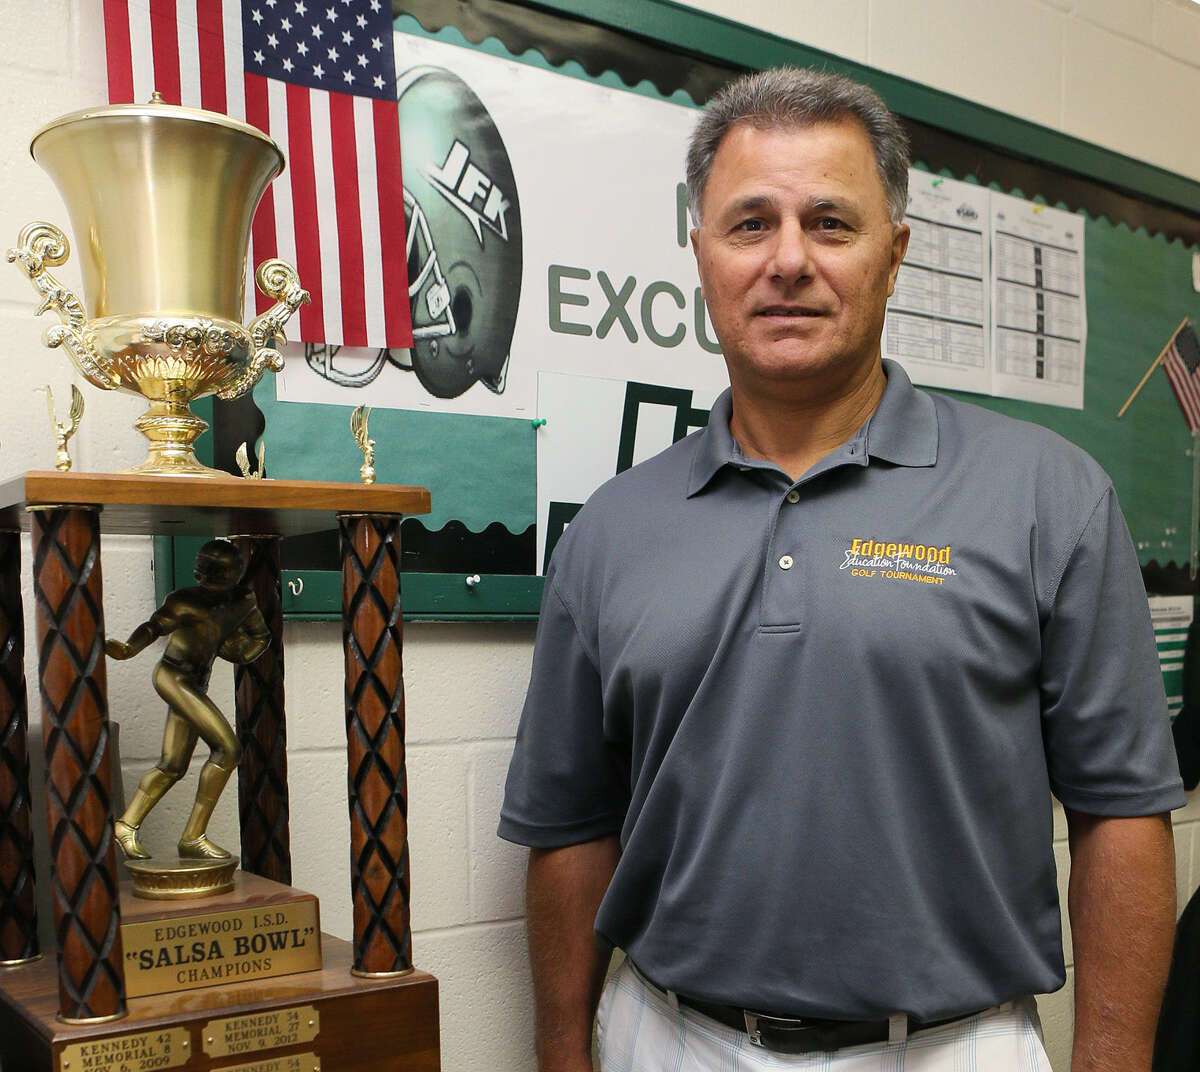 Michael Inco, Kennedy High School's new athletic director and head football coach, poses Thursday with the Salsa Bowl trophy the Rockets won last year.